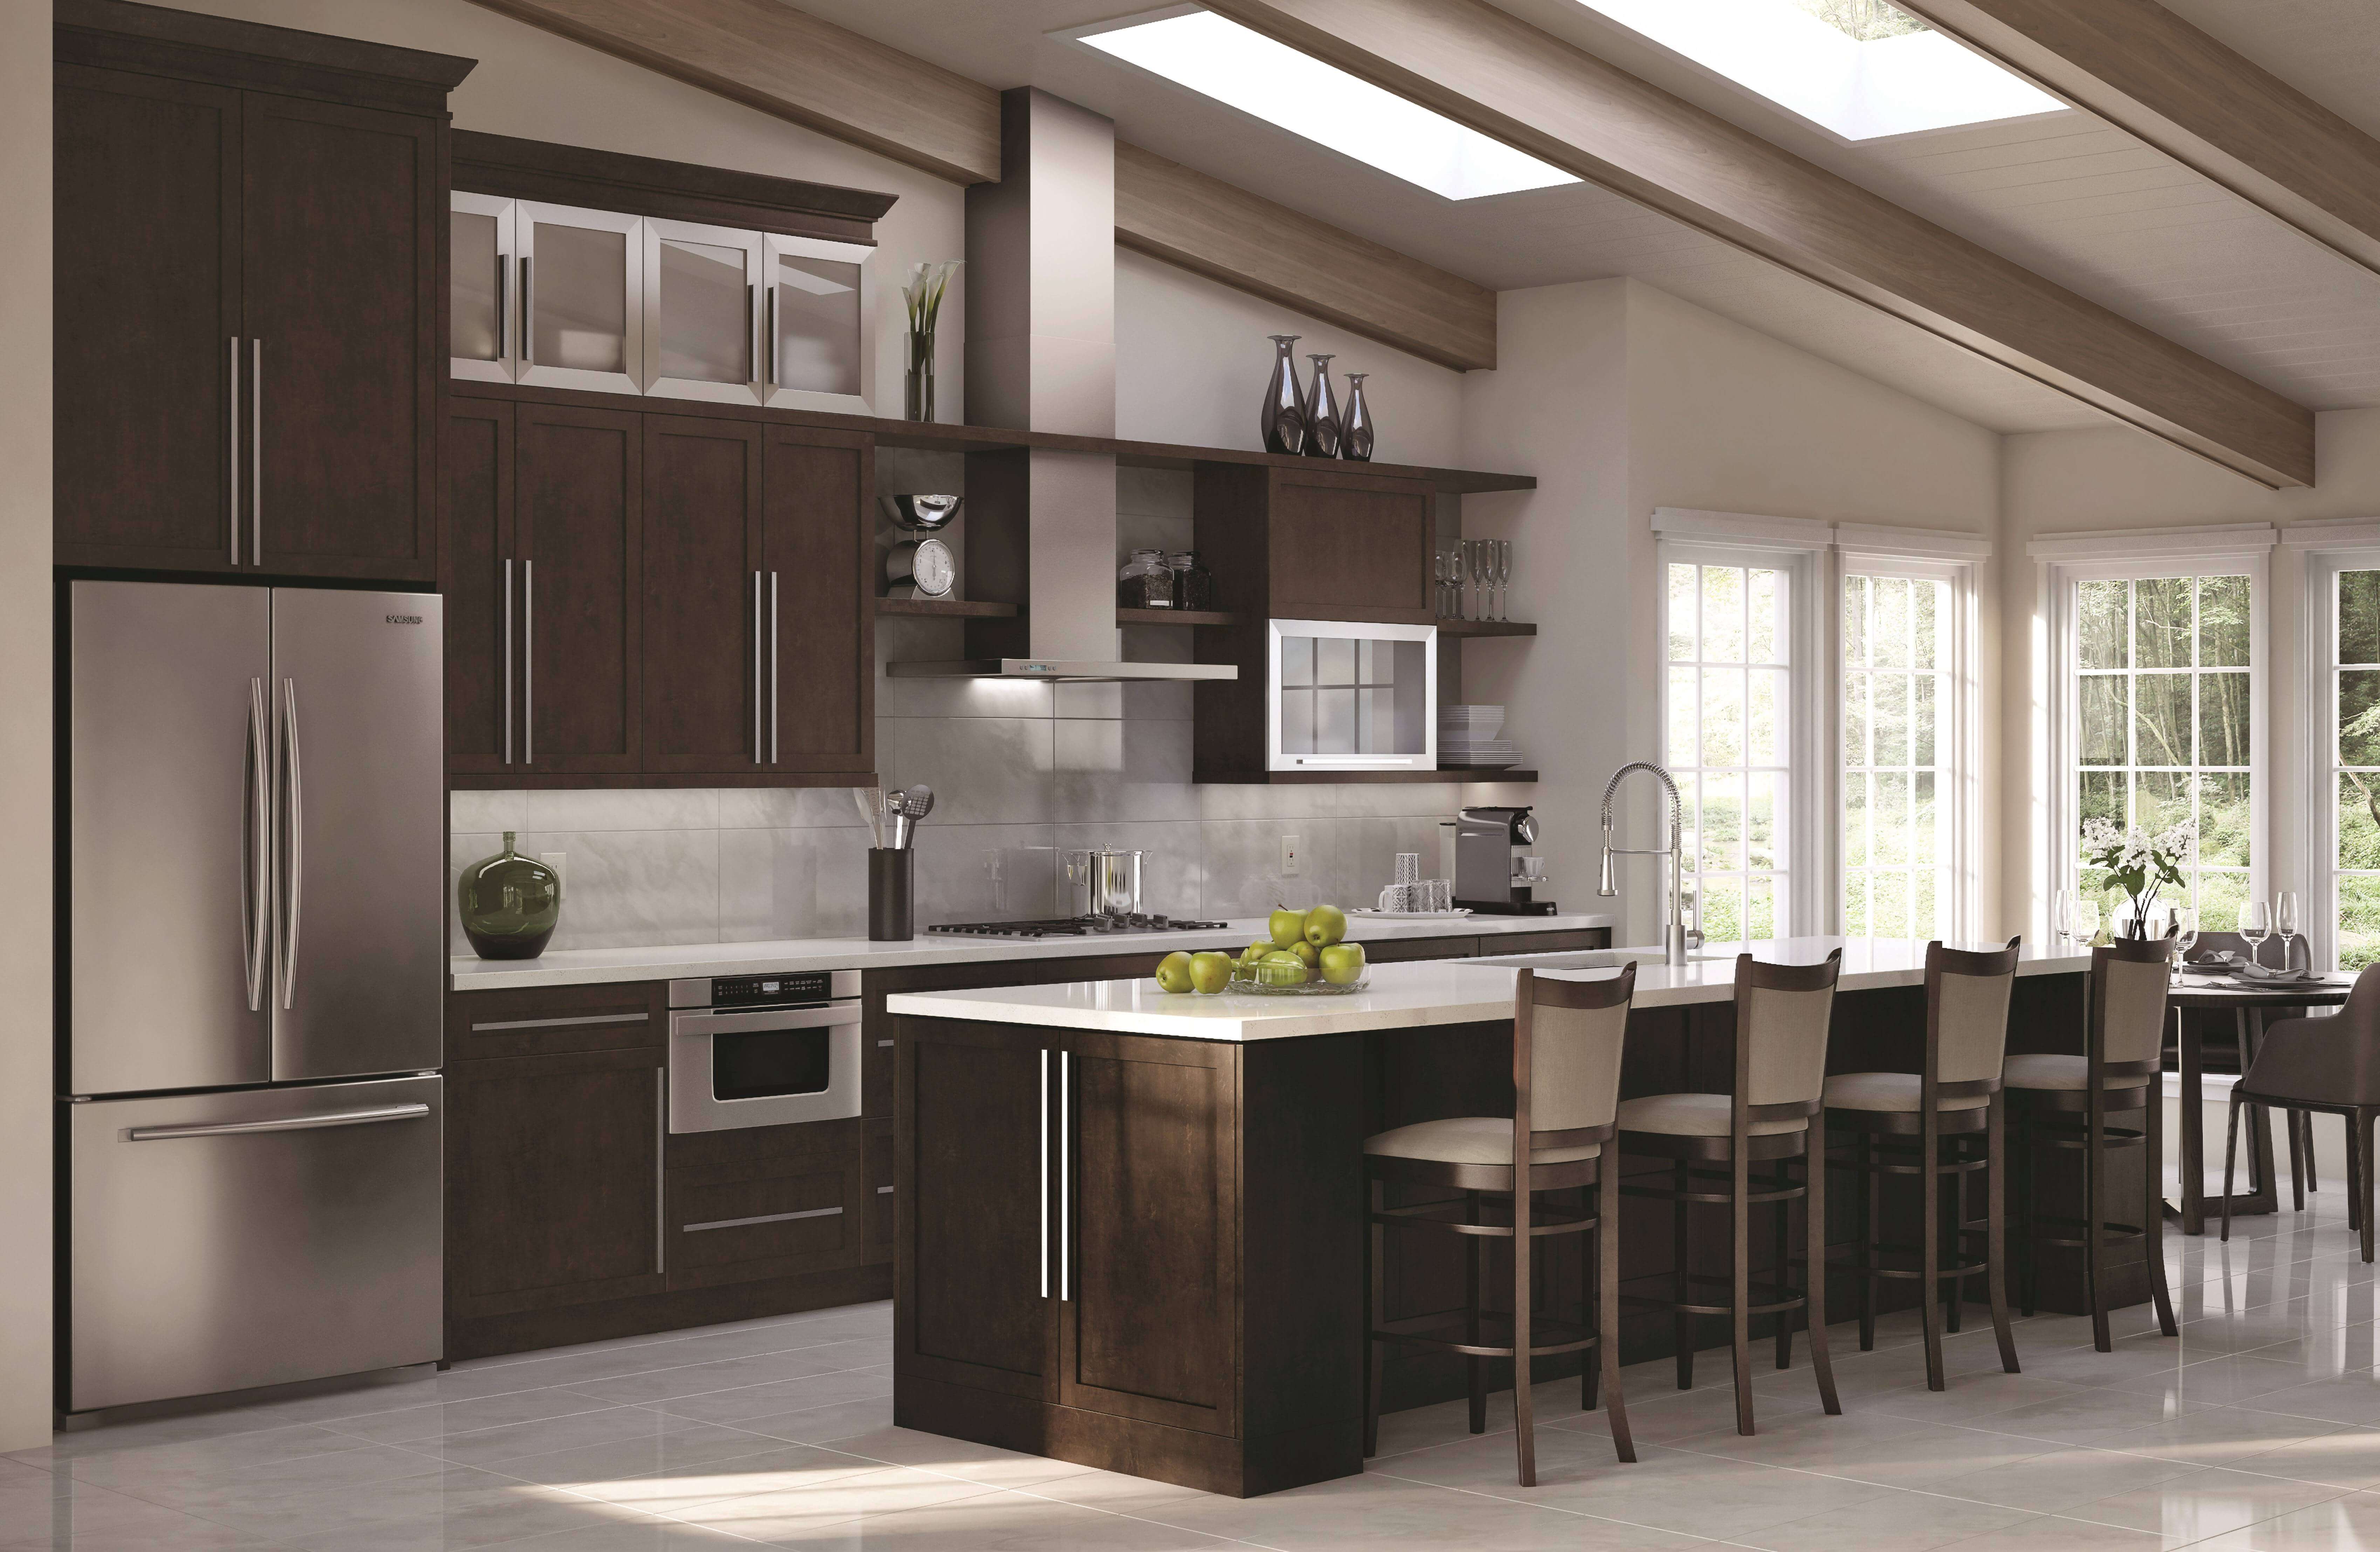 Start with our Kitchen Cabinet Design team today